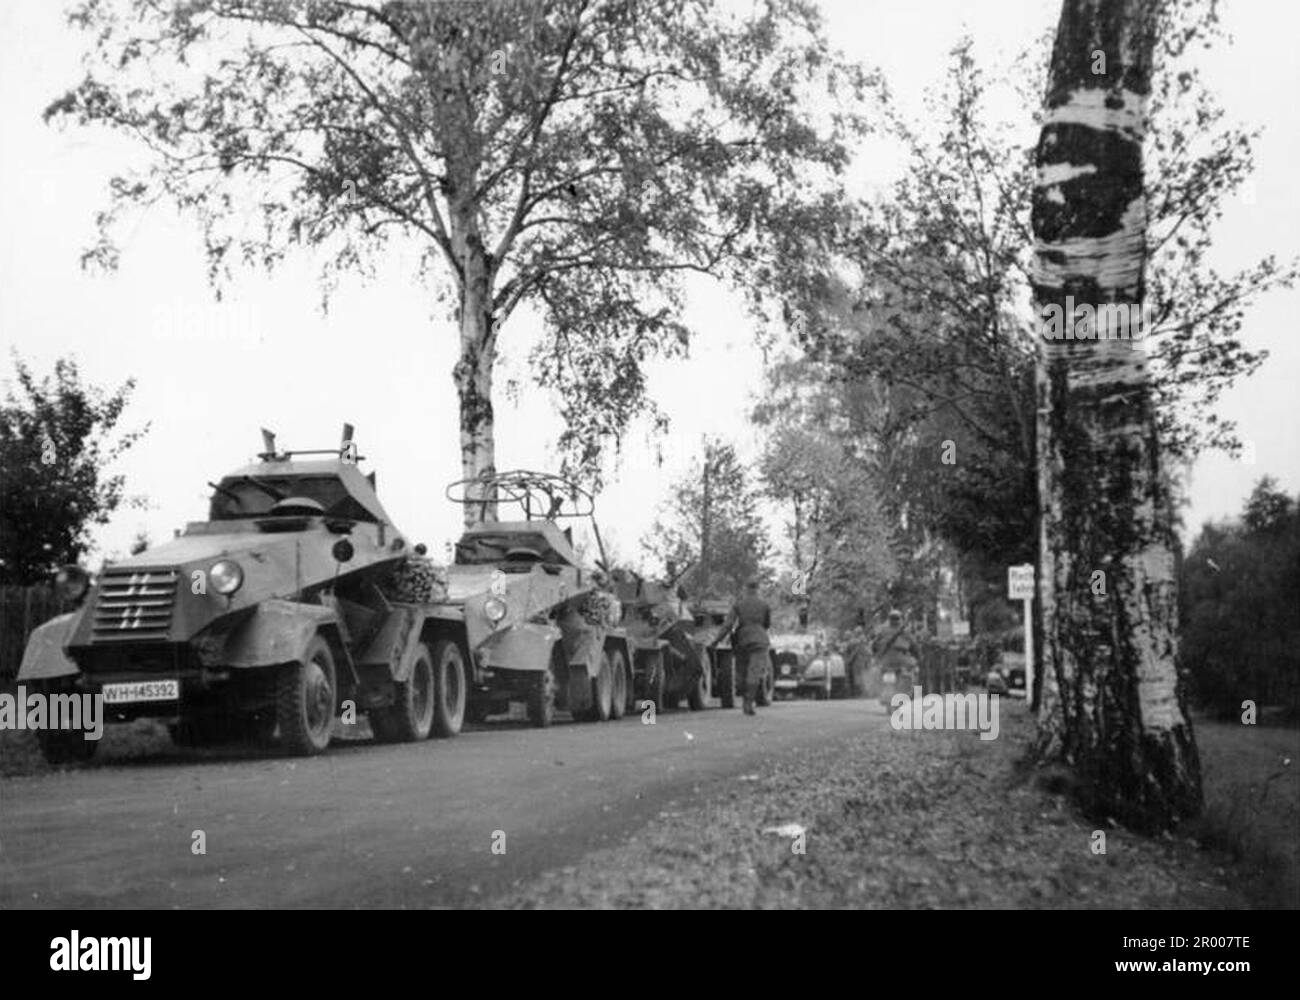 German armored cars standing by the Reich frontier near Schirnding waiting to enter the Sudeten.As soon as the Western powers betrayed the Czechs and gave the Sudetenland to Germany the area was annexed. fter the annexation of Austria, Hitler demanded that he be given the Sudeten region of Czechoslovakia. At the Munich conference in September 1938 the Western powers agreed to this and the nazis occupied the area. Not long after Hitler broke his promise and invaded the rest of Czechoslovakia before turning his attention to Poland. Bundesarchiv, Bild 146-2003-0041 / CC-BY-SA 3.0 Stock Photo